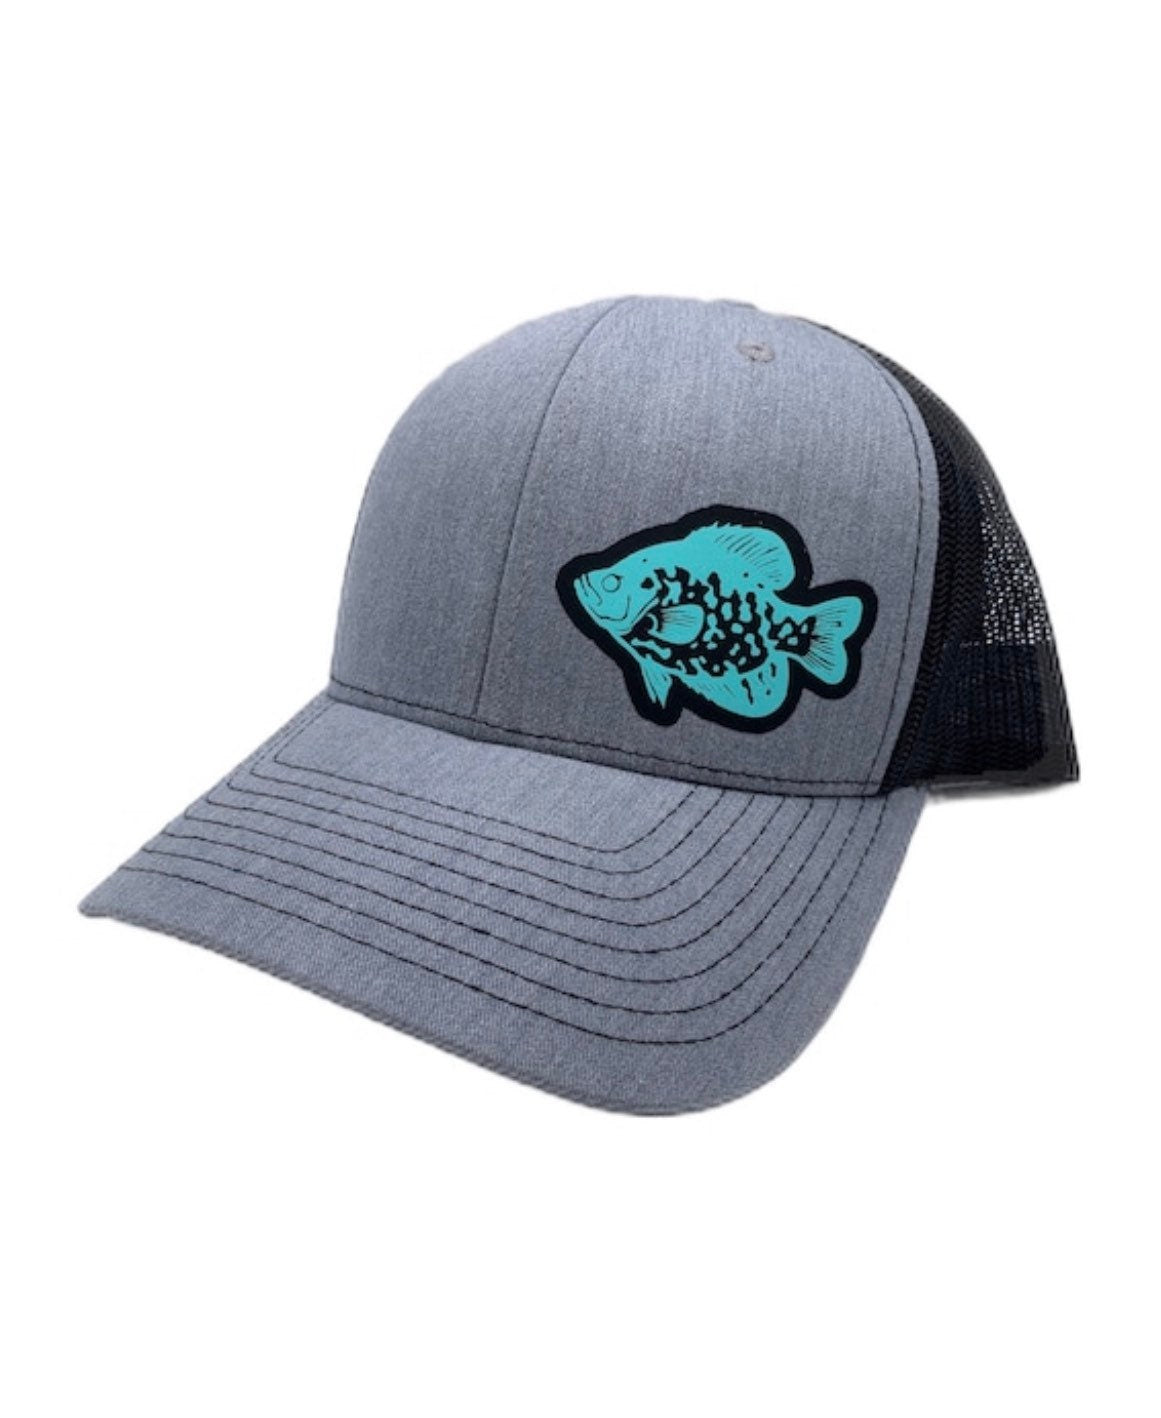 Crappie Fishing SnapBack Adjustable Hat with multiple hat color options